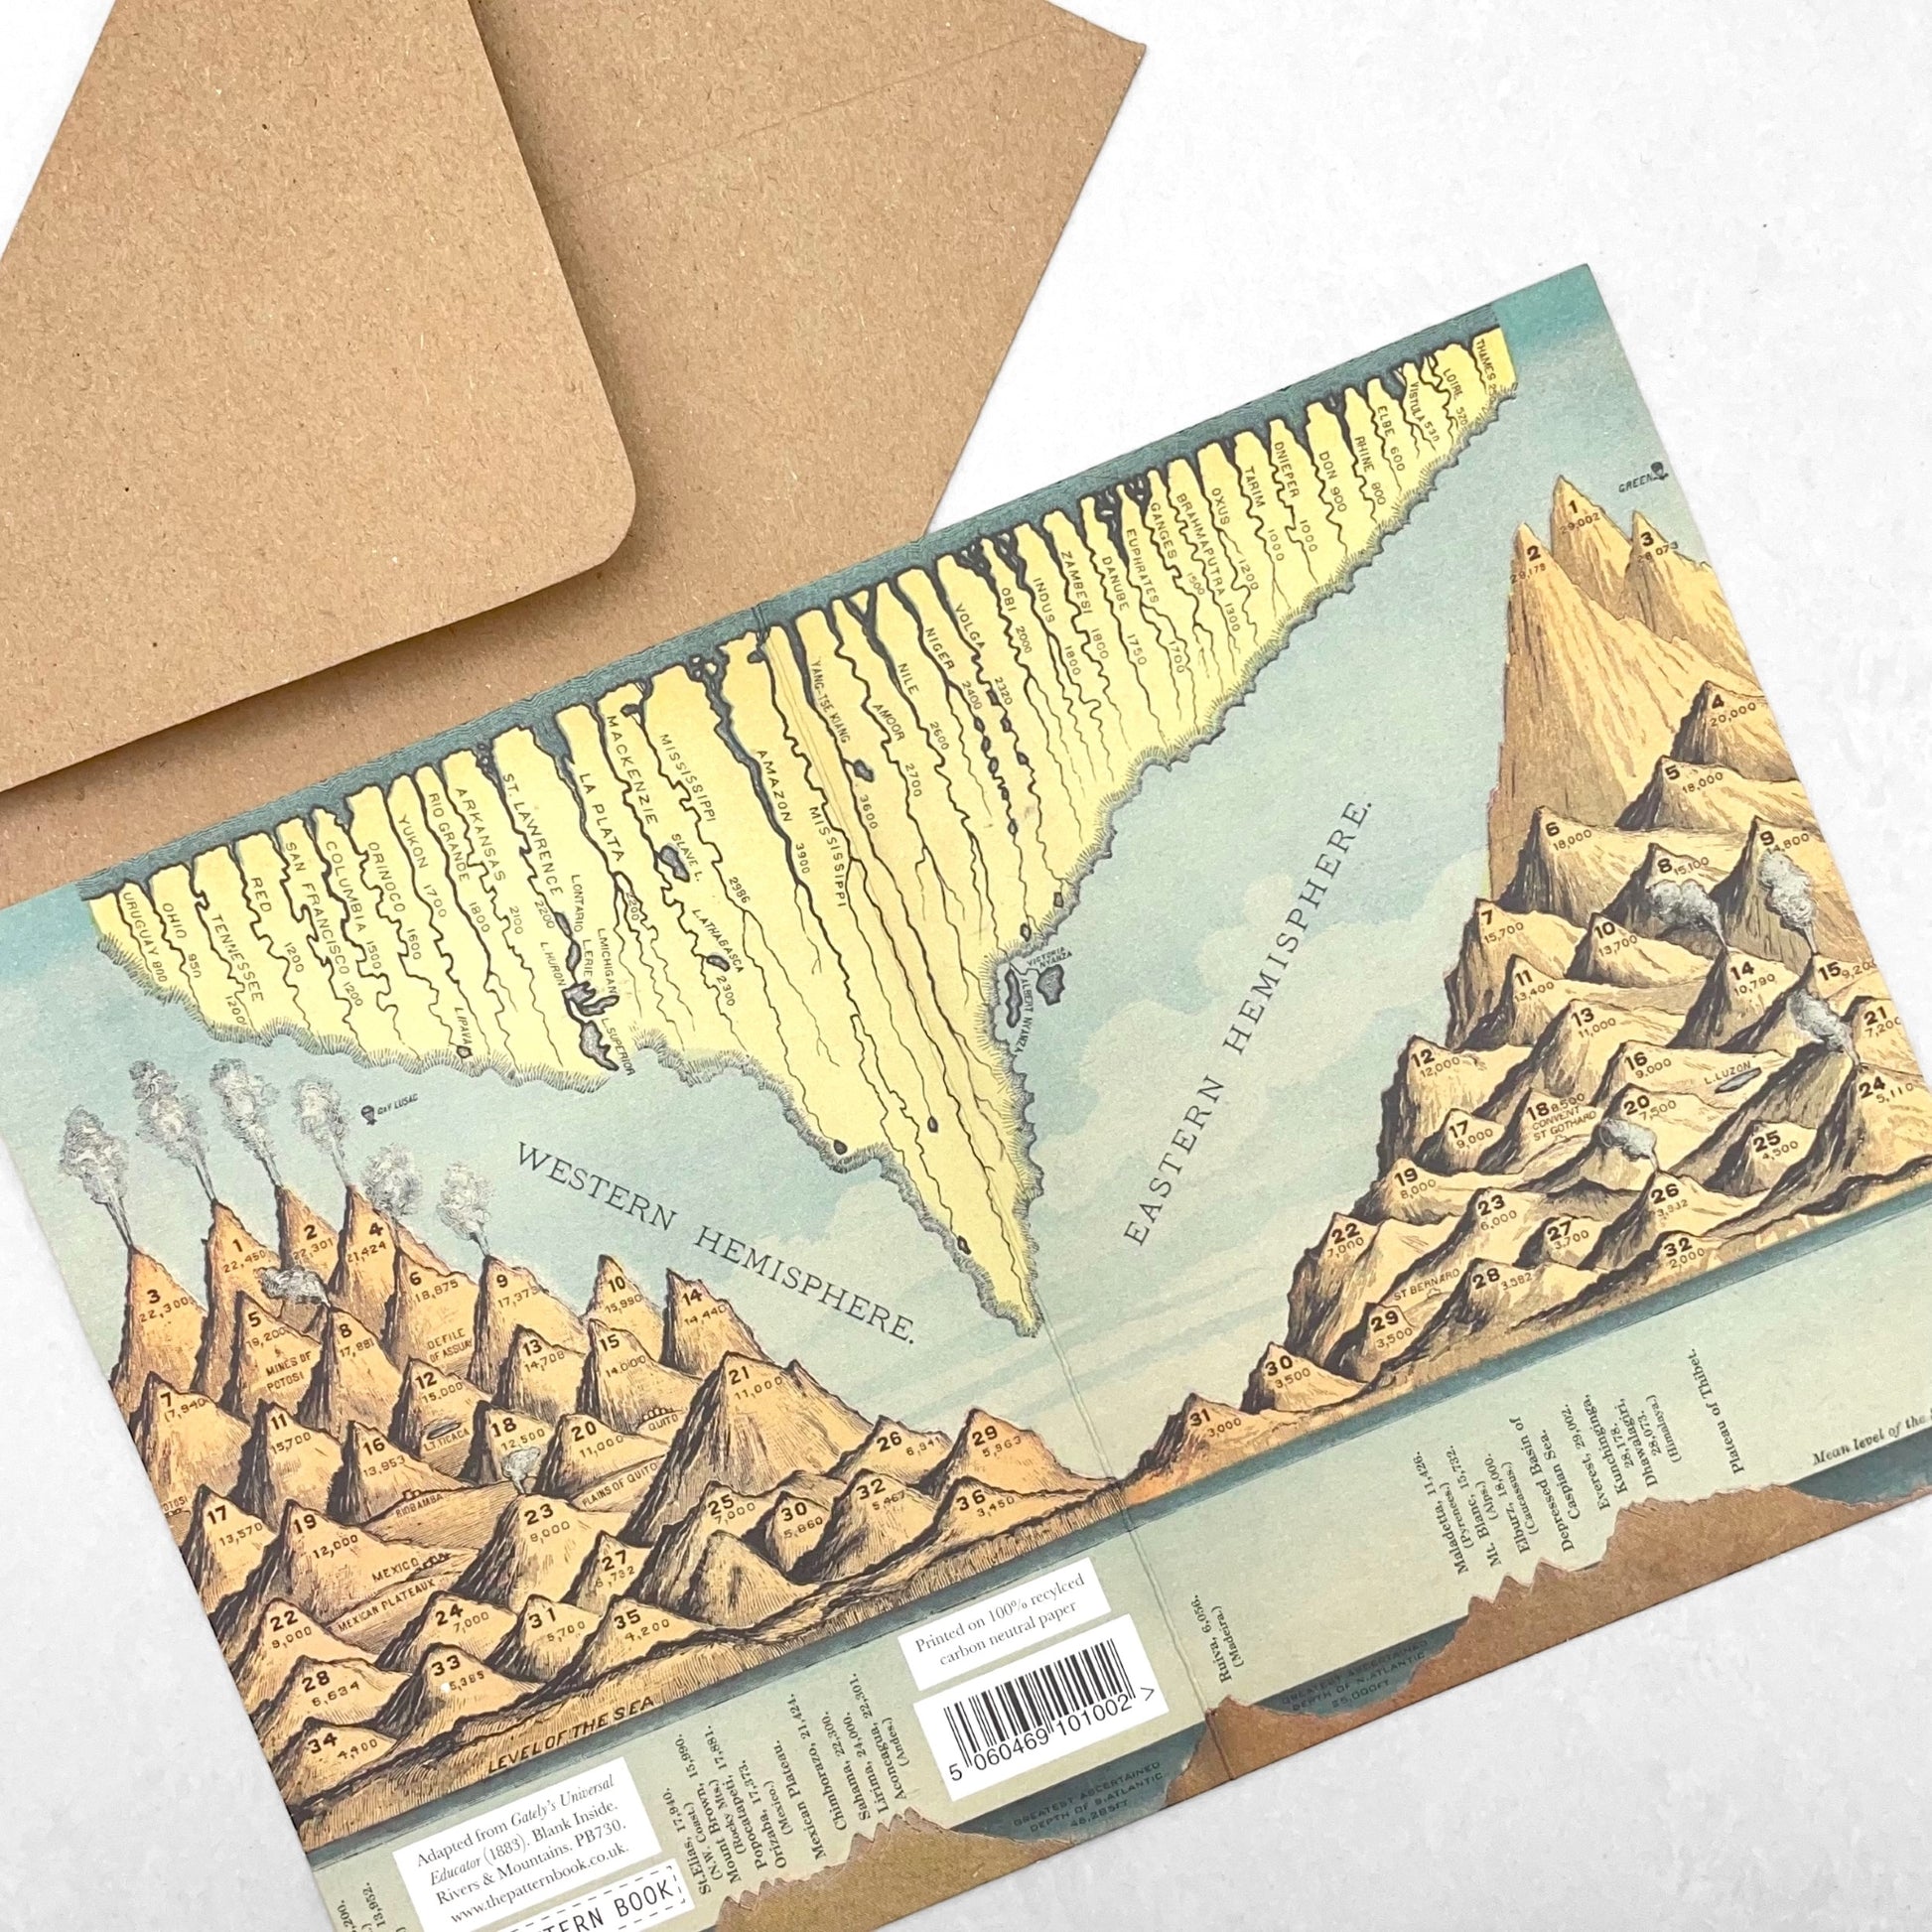 Greetings card by The Pattern Book. The front of this card has a drawing of the rivers and mountains of the Eastern hemisphere. The reverse depicts those of the Western hemisphere. With Envelope